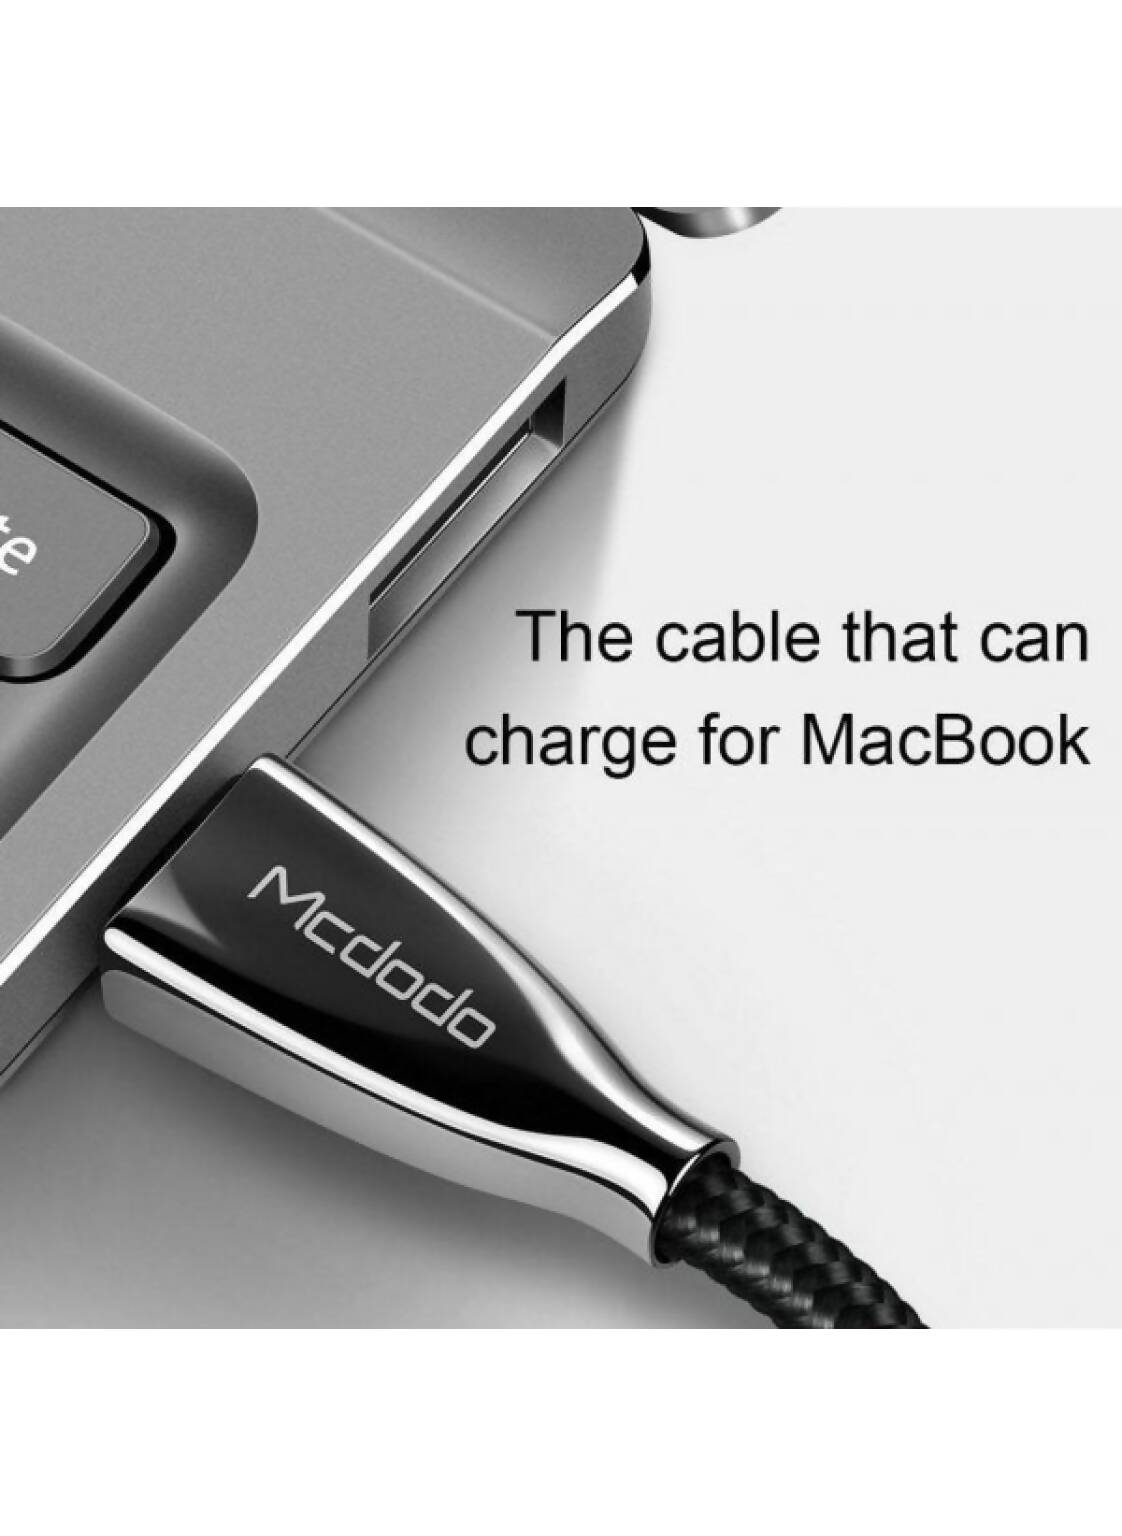 Mcdodo USB Type-C to USB Type-C 2.0 Charger Cable